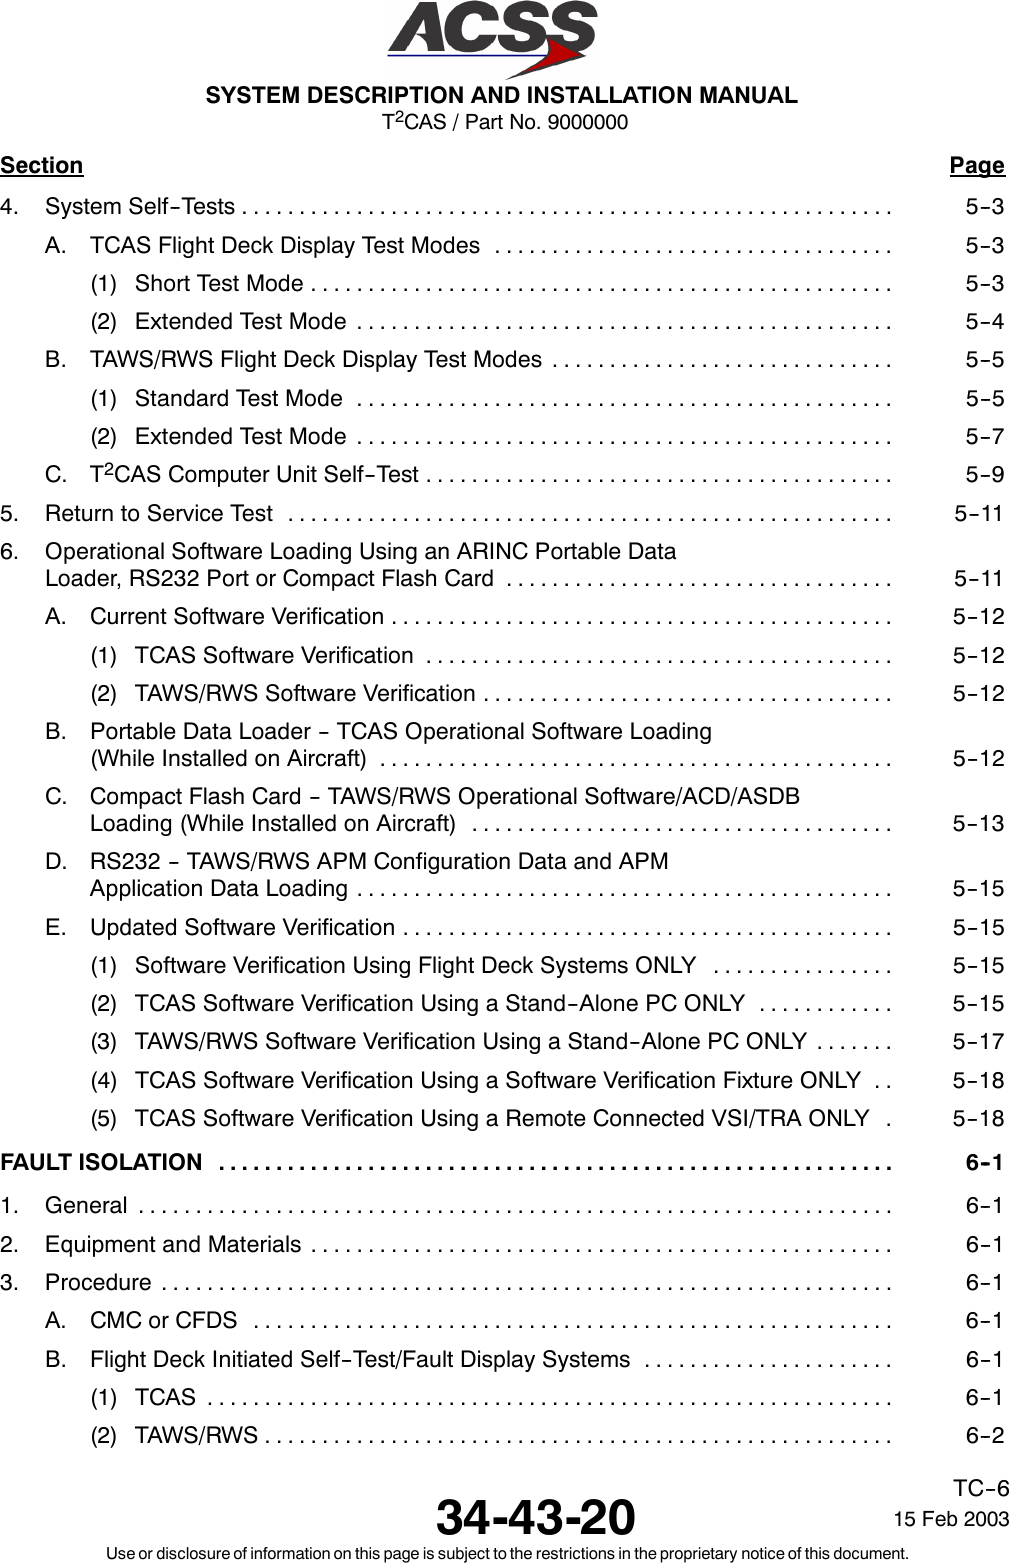 T2CAS / Part No. 9000000SYSTEM DESCRIPTION AND INSTALLATION MANUAL34-43-20 15 Feb 2003Use or disclosure of information on this page is subject to the restrictions in the proprietary notice of this document.TC--6Section Page4. System Self--Tests 5--3.........................................................A. TCAS Flight Deck Display Test Modes 5--3...................................(1) Short Test Mode 5--3...................................................(2) Extended Test Mode 5--4...............................................B. TAWS/RWS Flight Deck Display Test Modes 5--5..............................(1) Standard Test Mode 5--5...............................................(2) Extended Test Mode 5--7...............................................C. T2CAS Computer Unit Self--Test 5--9.........................................5. Return to Service Test 5--11.....................................................6. Operational Software Loading Using an ARINC Portable DataLoader, RS232 Port or Compact Flash Card 5--11..................................A. Current Software Verification 5--12............................................(1) TCAS Software Verification 5--12.........................................(2) TAWS/RWS Software Verification 5--12....................................B. Portable Data Loader -- TCAS Operational Software Loading(While Installed on Aircraft) 5--12.............................................C. Compact Flash Card -- TAWS/RWS Operational Software/ACD/ASDBLoading (While Installed on Aircraft) 5--13.....................................D. RS232 -- TAWS/RWS APM Configuration Data and APMApplication Data Loading 5--15...............................................E. Updated Software Verification 5--15...........................................(1) Software Verification Using Flight Deck Systems ONLY 5--15................(2) TCAS Software Verification Using a Stand--Alone PC ONLY 5--15............(3) TAWS/RWS Software Verification Using a Stand--Alone PC ONLY 5--17.......(4) TCAS Software Verification Using a Software Verification Fixture ONLY 5--18..(5) TCAS Software Verification Using a Remote Connected VSI/TRA ONLY 5--18.FAULT ISOLATION 6--1...........................................................1. General 6--1..................................................................2. Equipment and Materials 6--1...................................................3. Procedure 6--1................................................................A. CMC or CFDS 6--1........................................................B. Flight Deck Initiated Self--Test/Fault Display Systems 6--1......................(1) TCAS 6--1............................................................(2) TAWS/RWS 6--2.......................................................